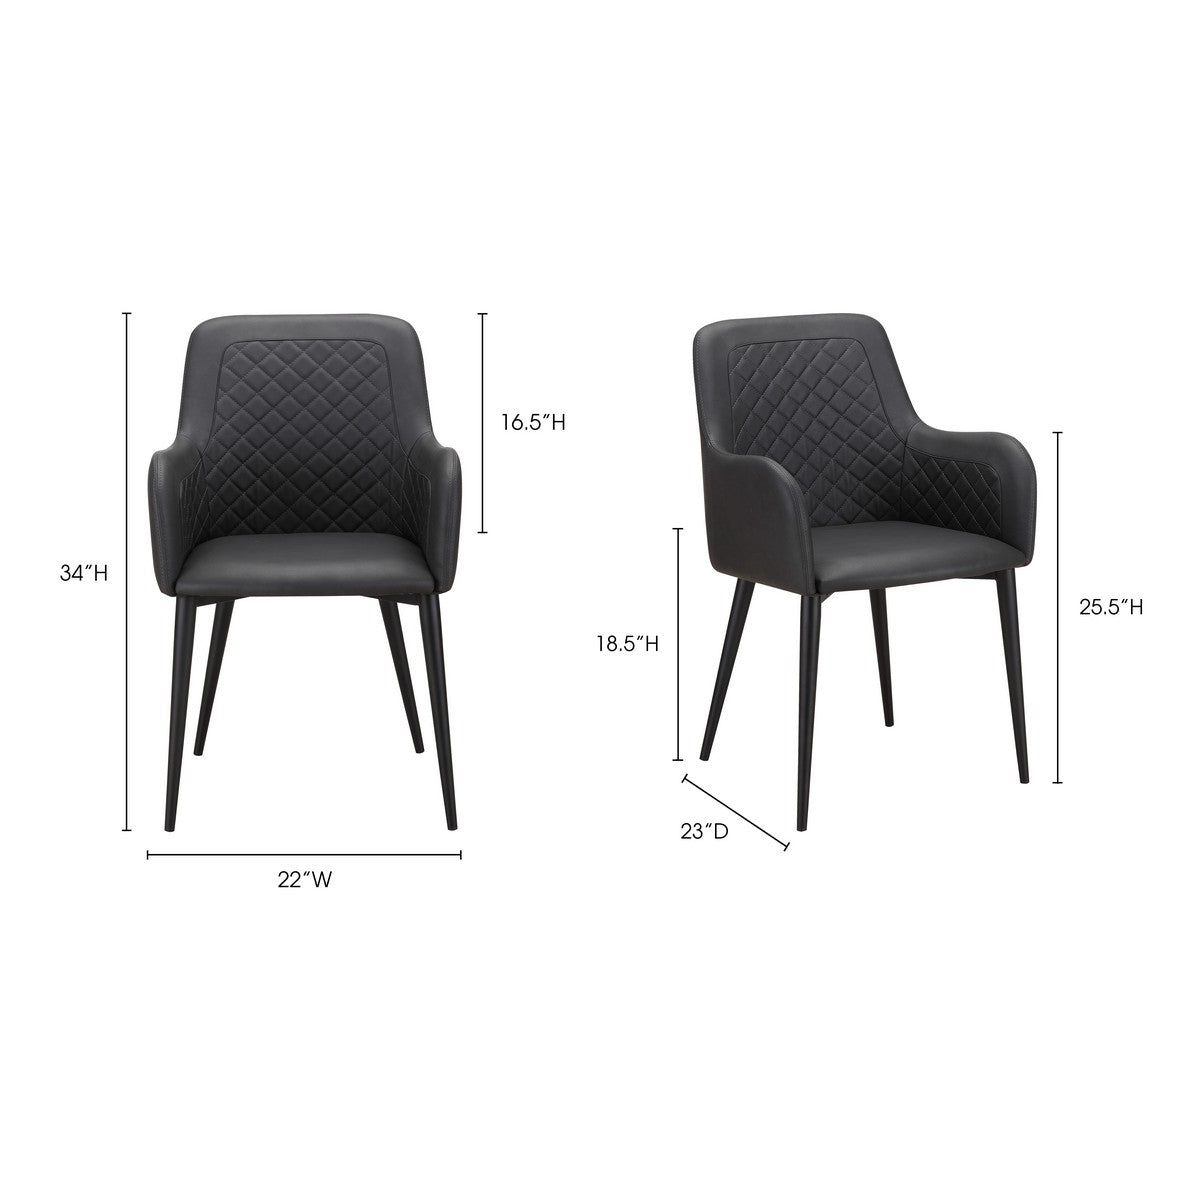 Moe's Home Collection Cantata Dining Chair Black-Set of Two - ER-2040-02